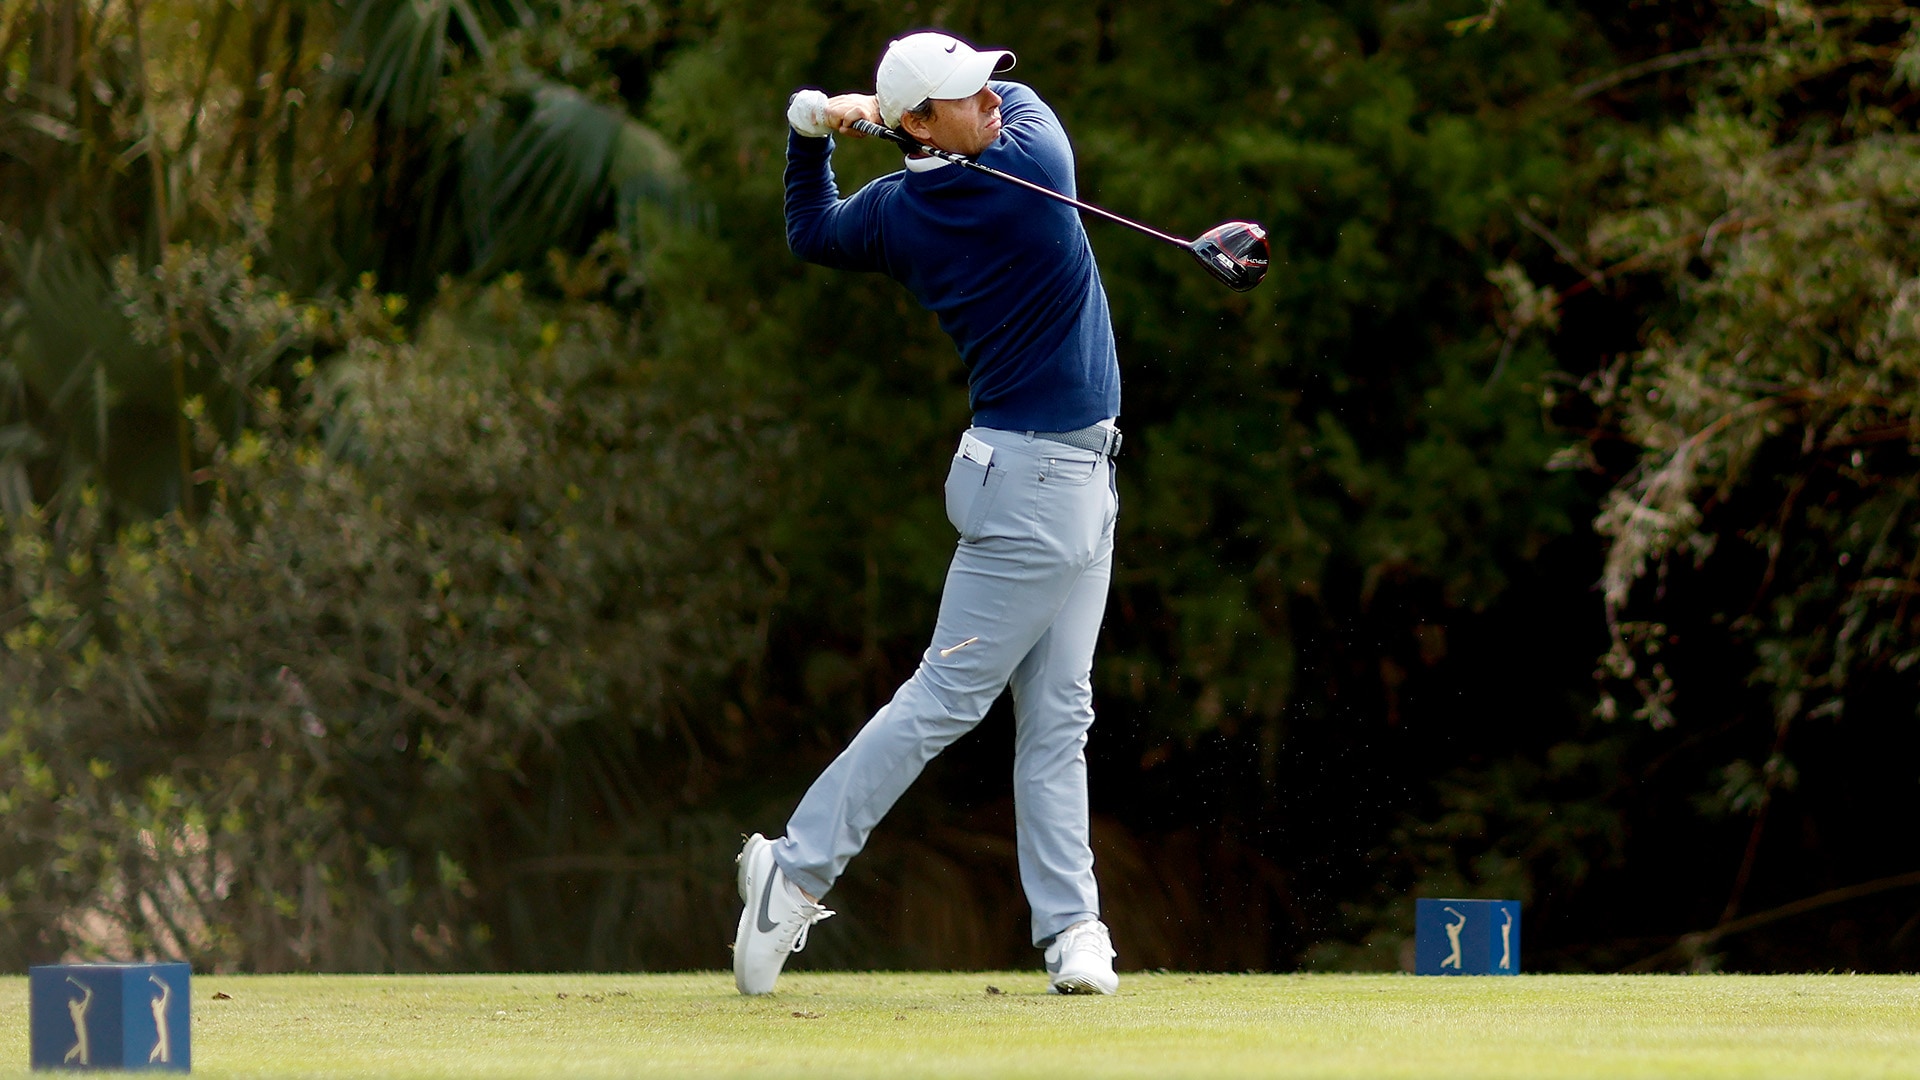 Rory McIlroy tries to find form with new driver, opens with 76: ‘User error’